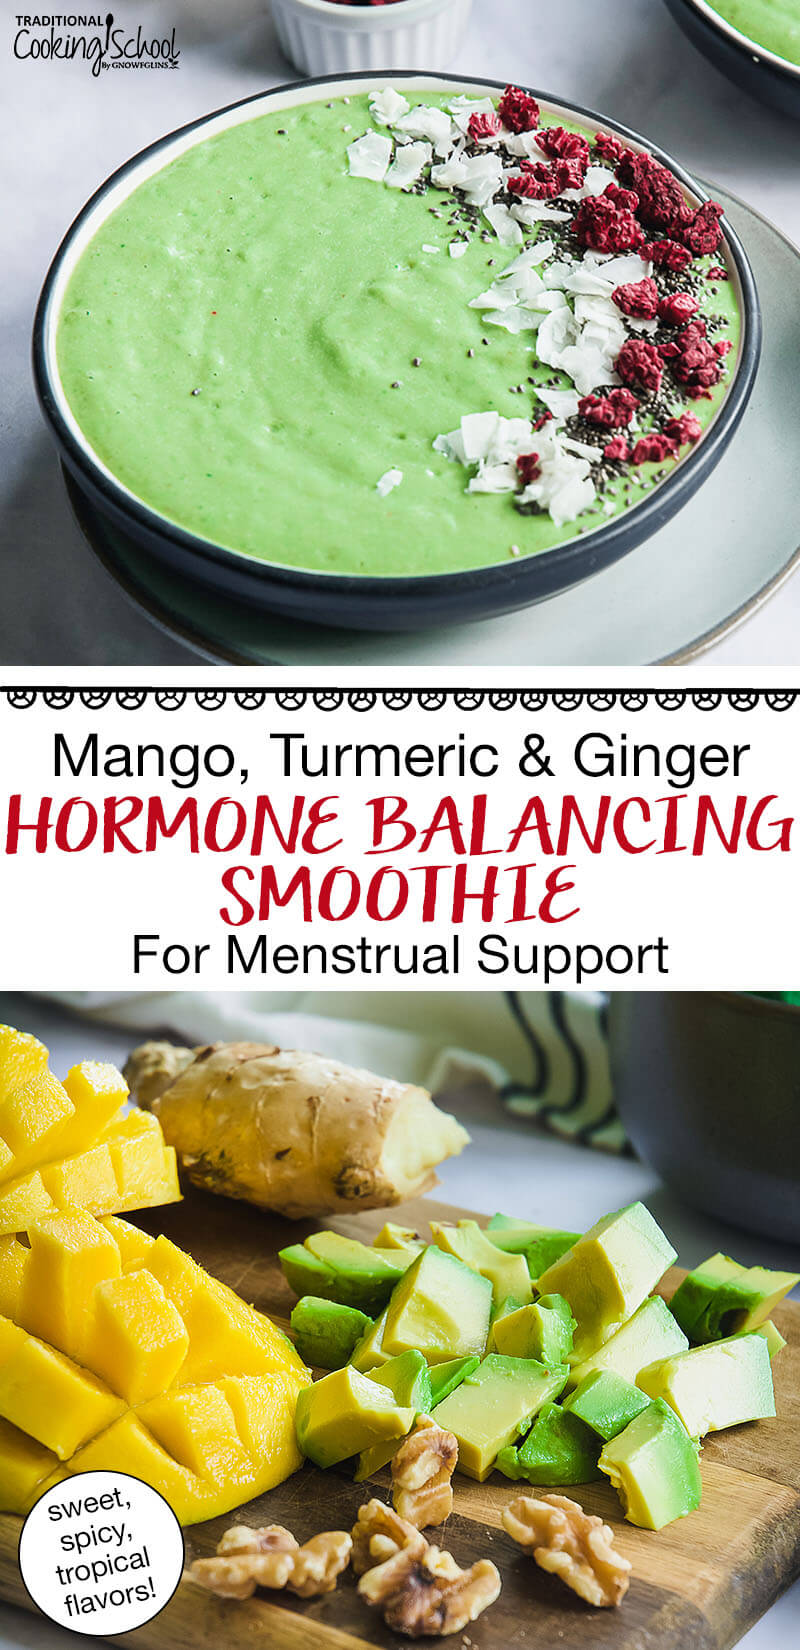 photo collage of bright green smoothie bowl and array of ingredients including mango, walnuts, and avocado chunks. Text overlay says: "Mango, Turmeric & Ginger Hormone Balancing Smoothie For Menstrual Support (spicy, sweet, tropical flavors!)"